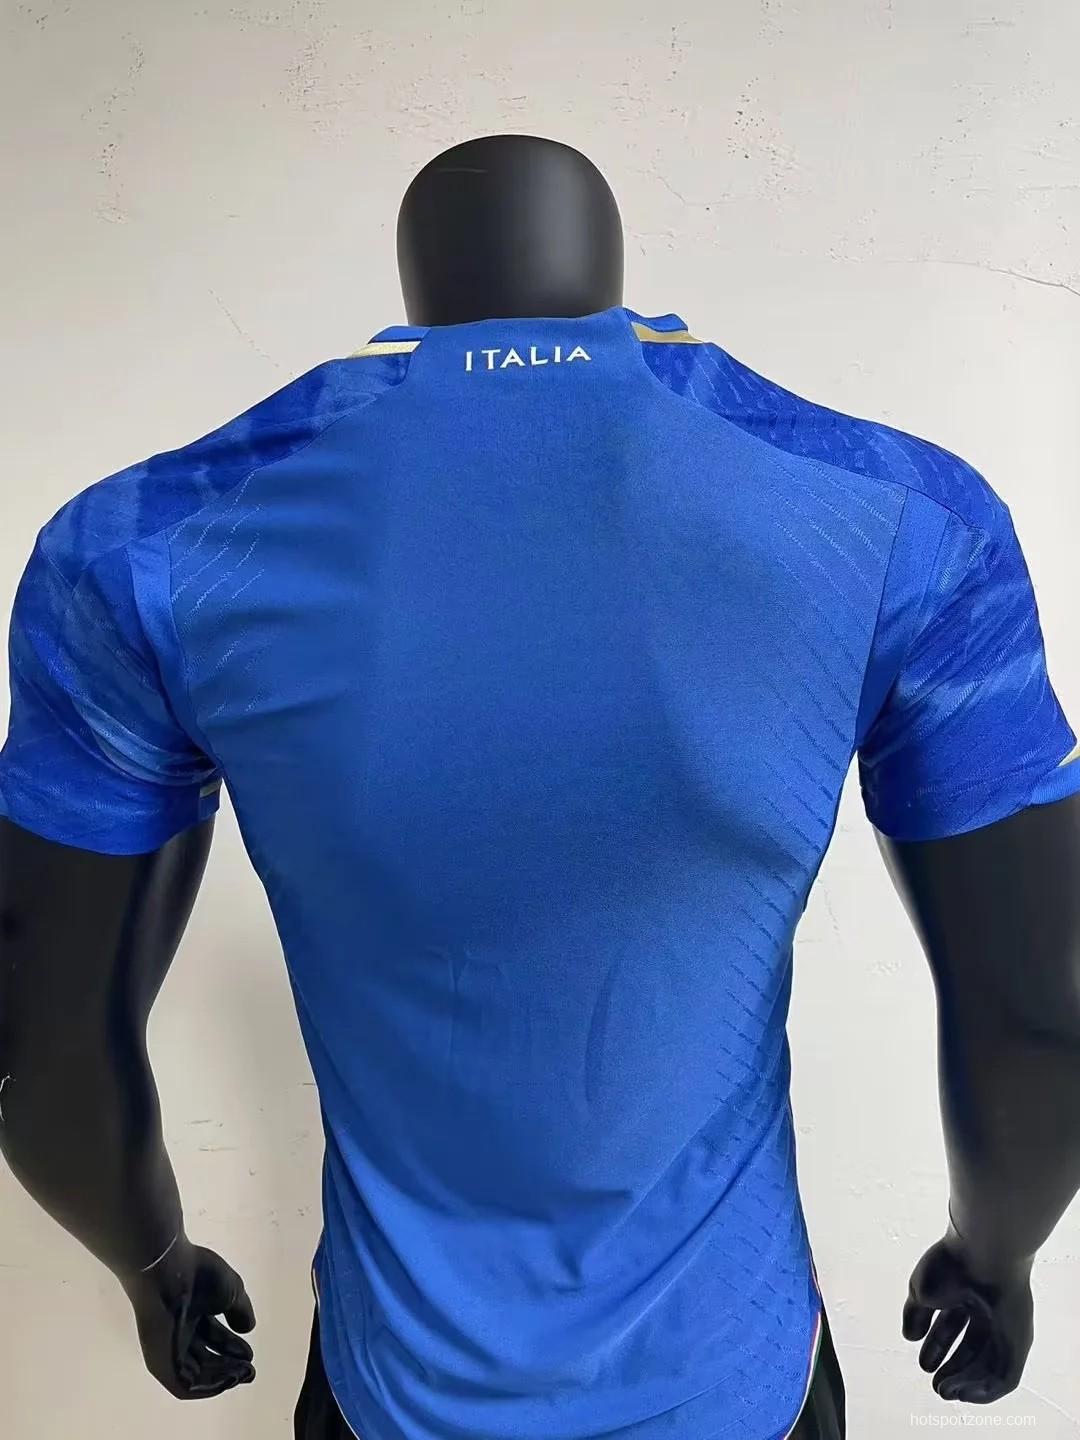 Player Version 2023 Italy Home Jersey